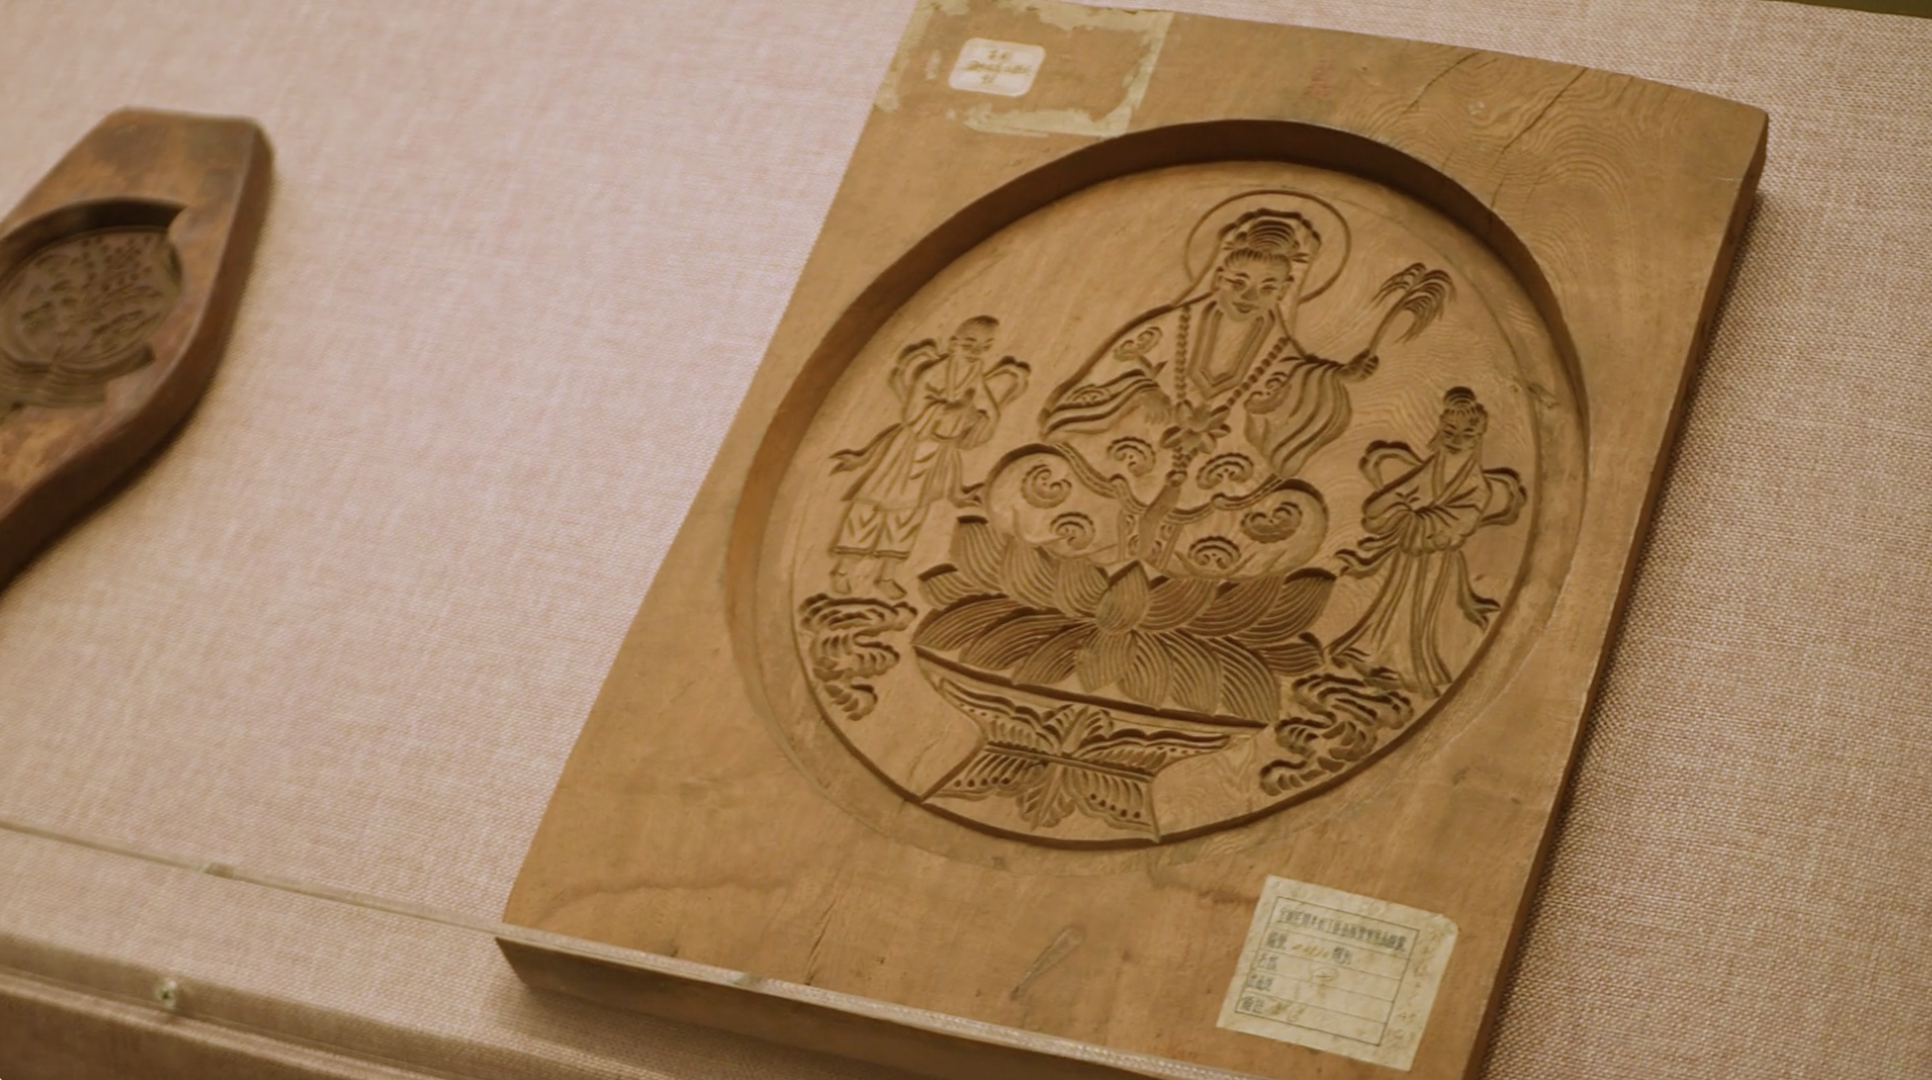 A large mooncake mold is exhibited at Tsinghua University Art Museum in Beijing. /CGTN